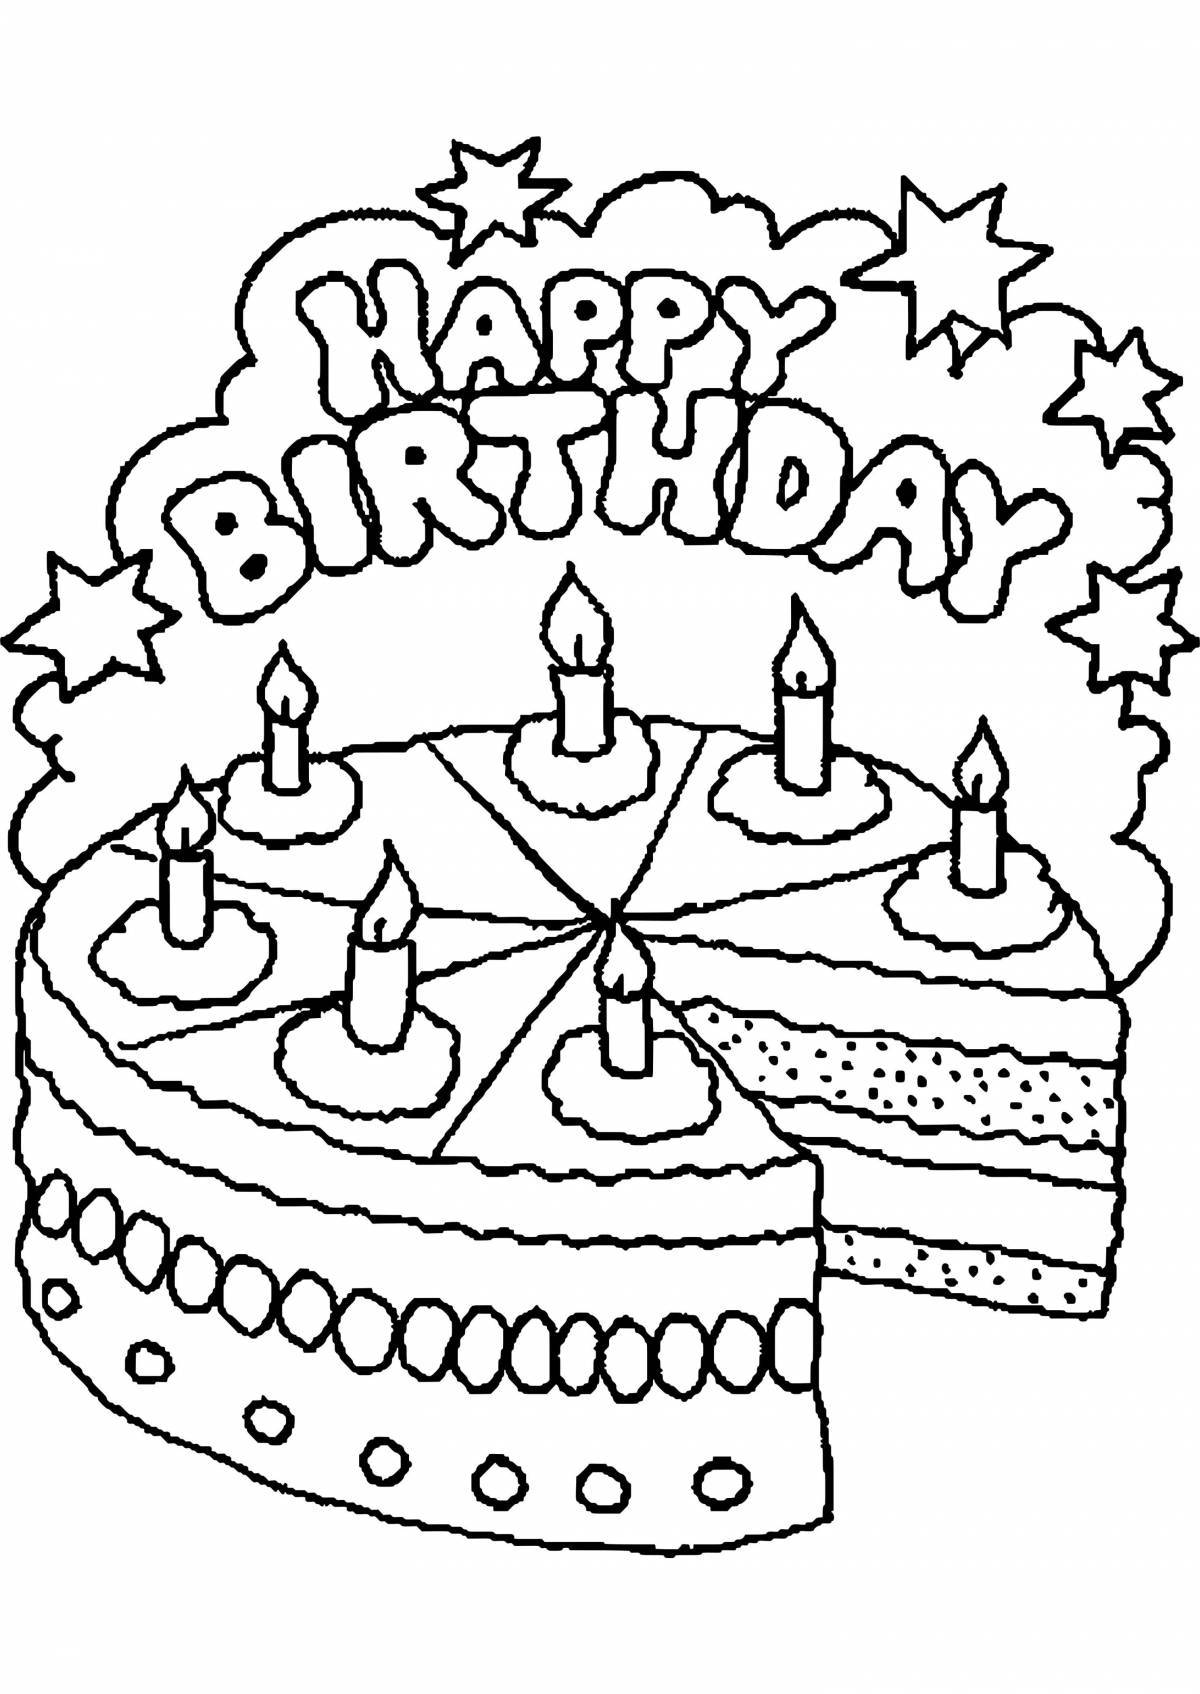 Fabulous happy birthday dad coloring page